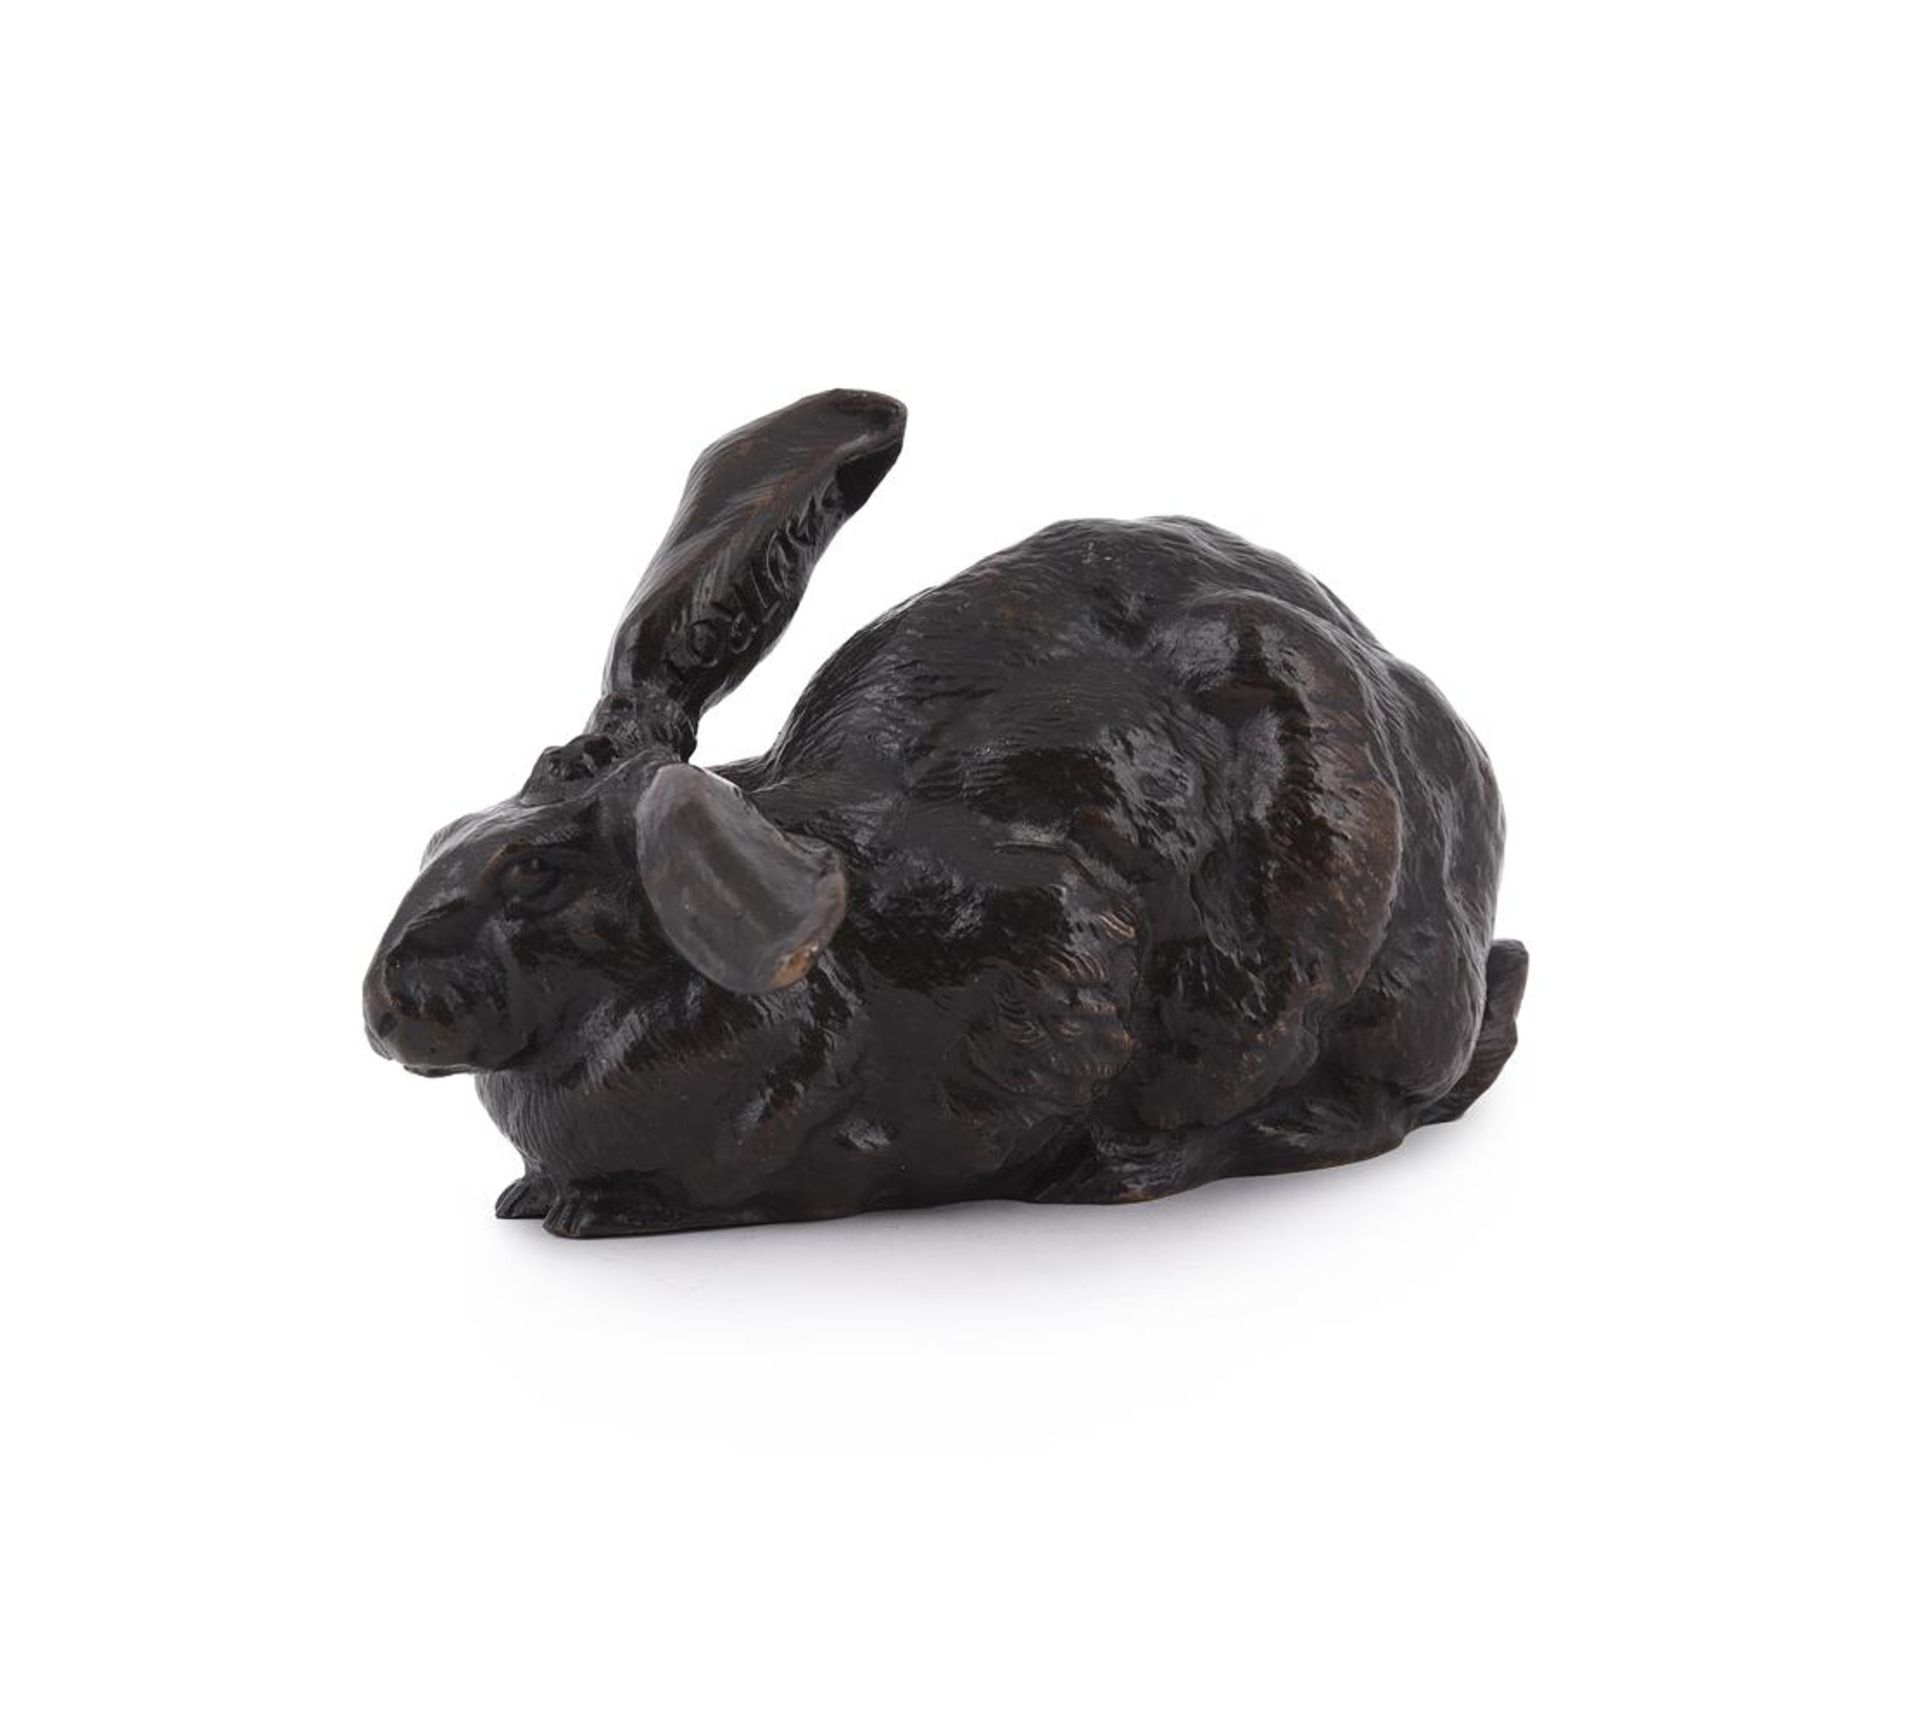 FERDINAND PAUTROT (FRENCH, 1832-1874), A BRONZE MODEL OF A RABBIT - Image 3 of 5